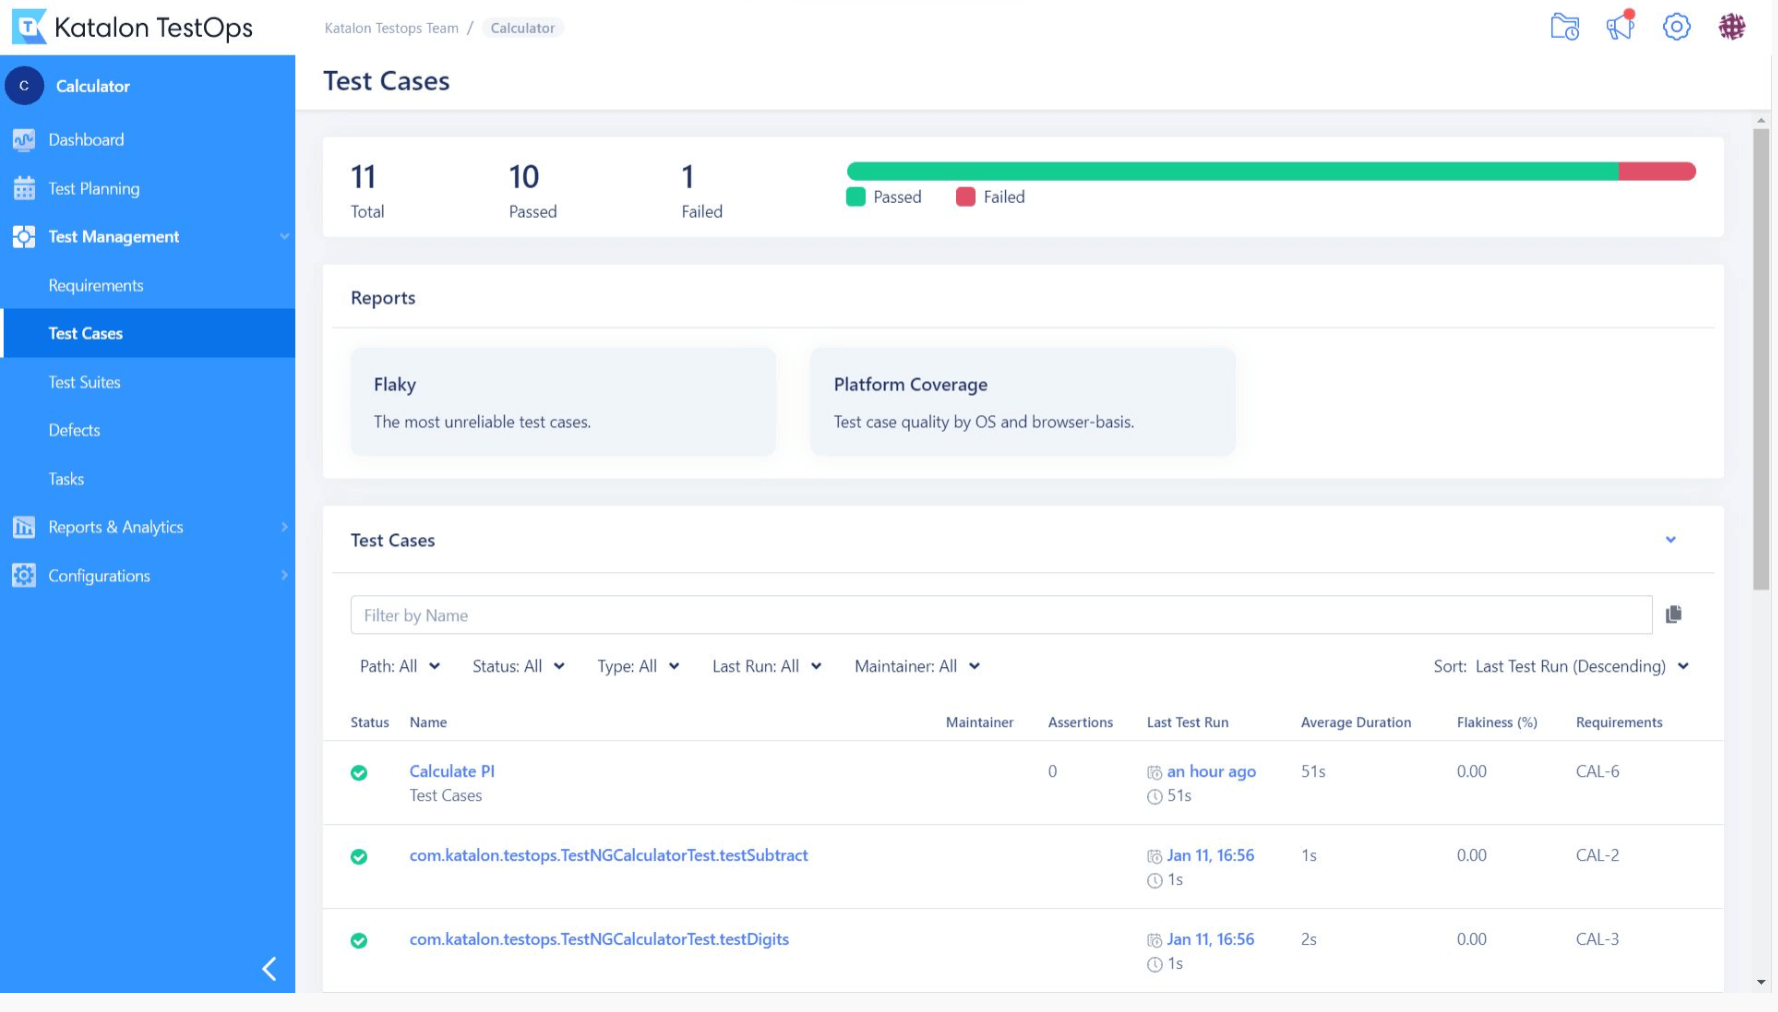  Centralized test dashboard with managers and related documents